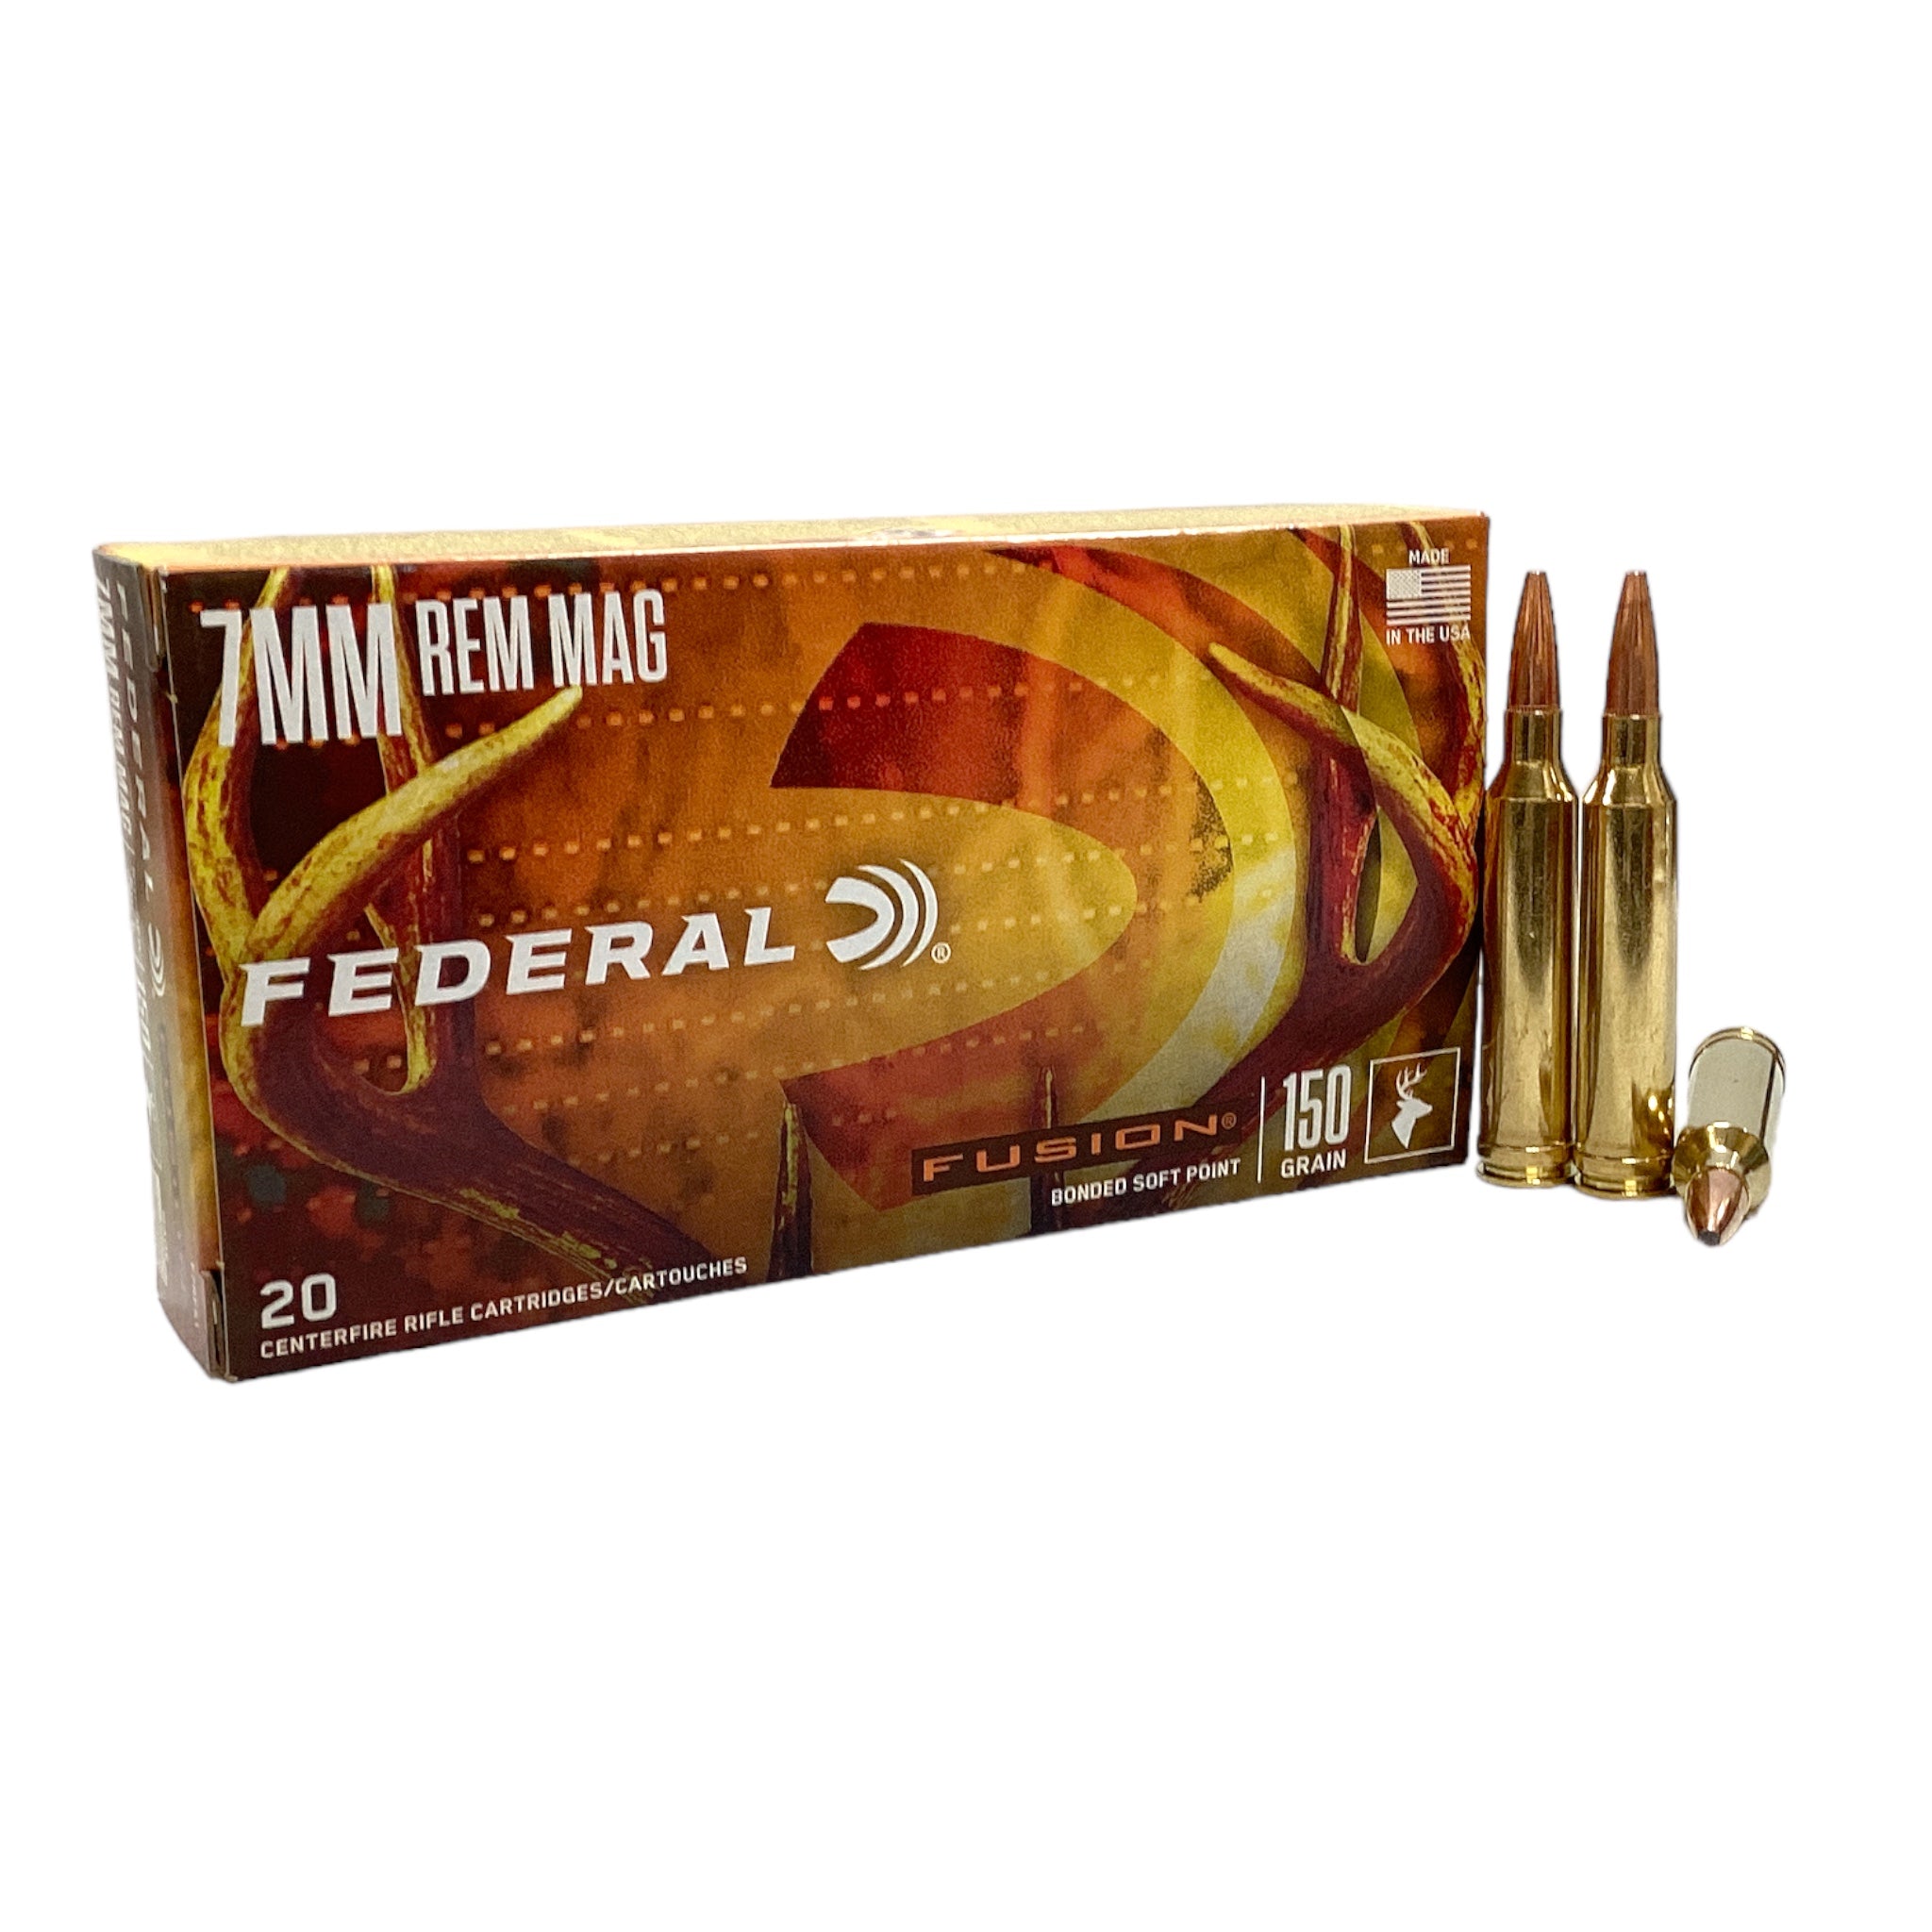 Federal Fusion Bonded SP Ships Immediately Ammo